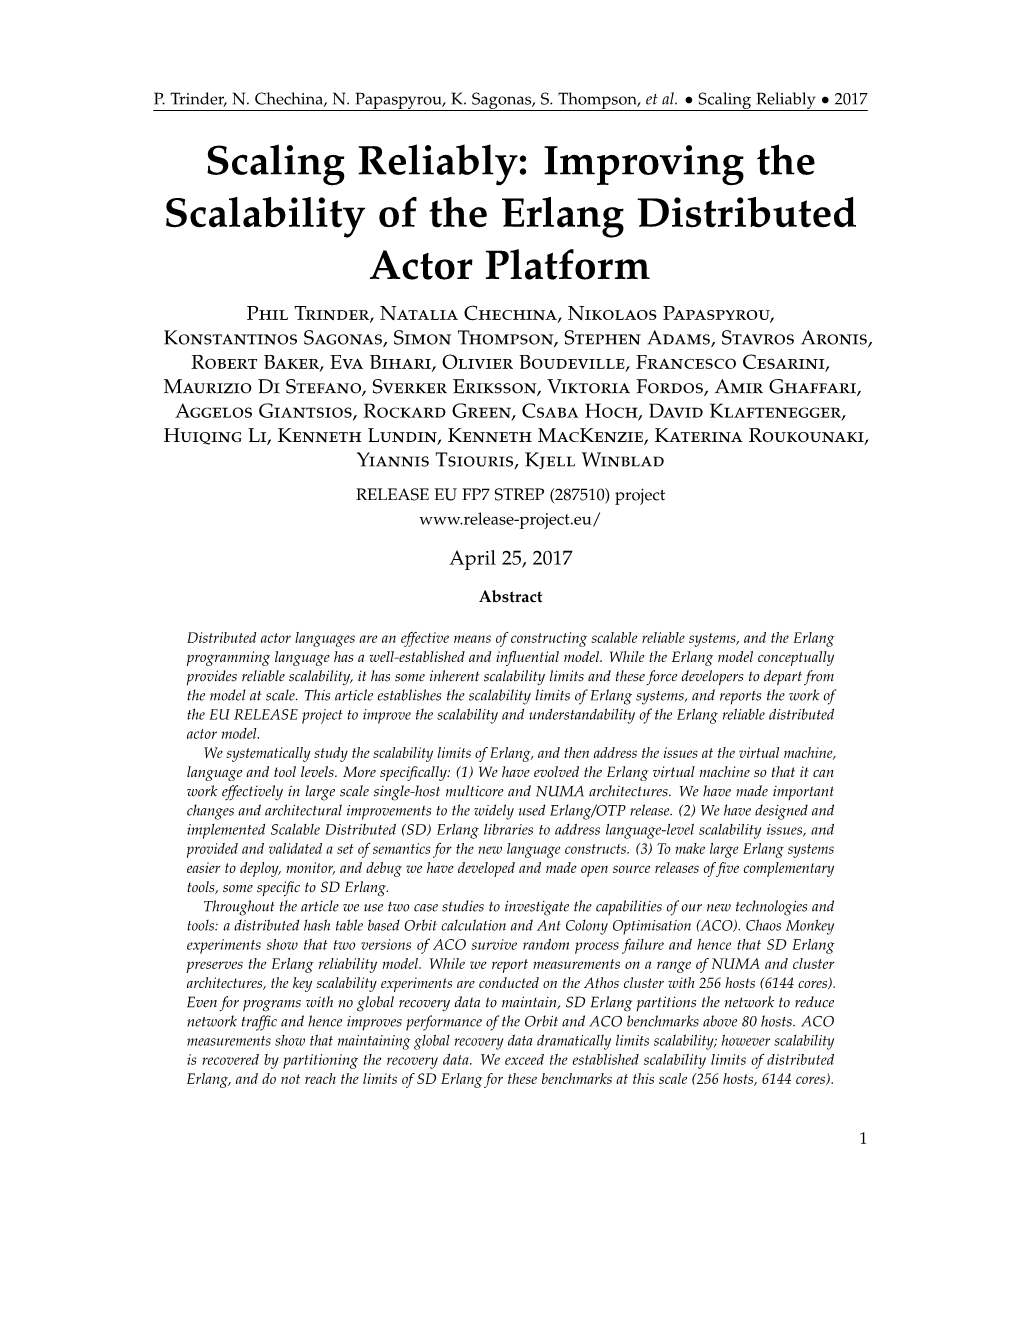 Scaling Reliably: Improving the Scalability of the Erlang Distributed